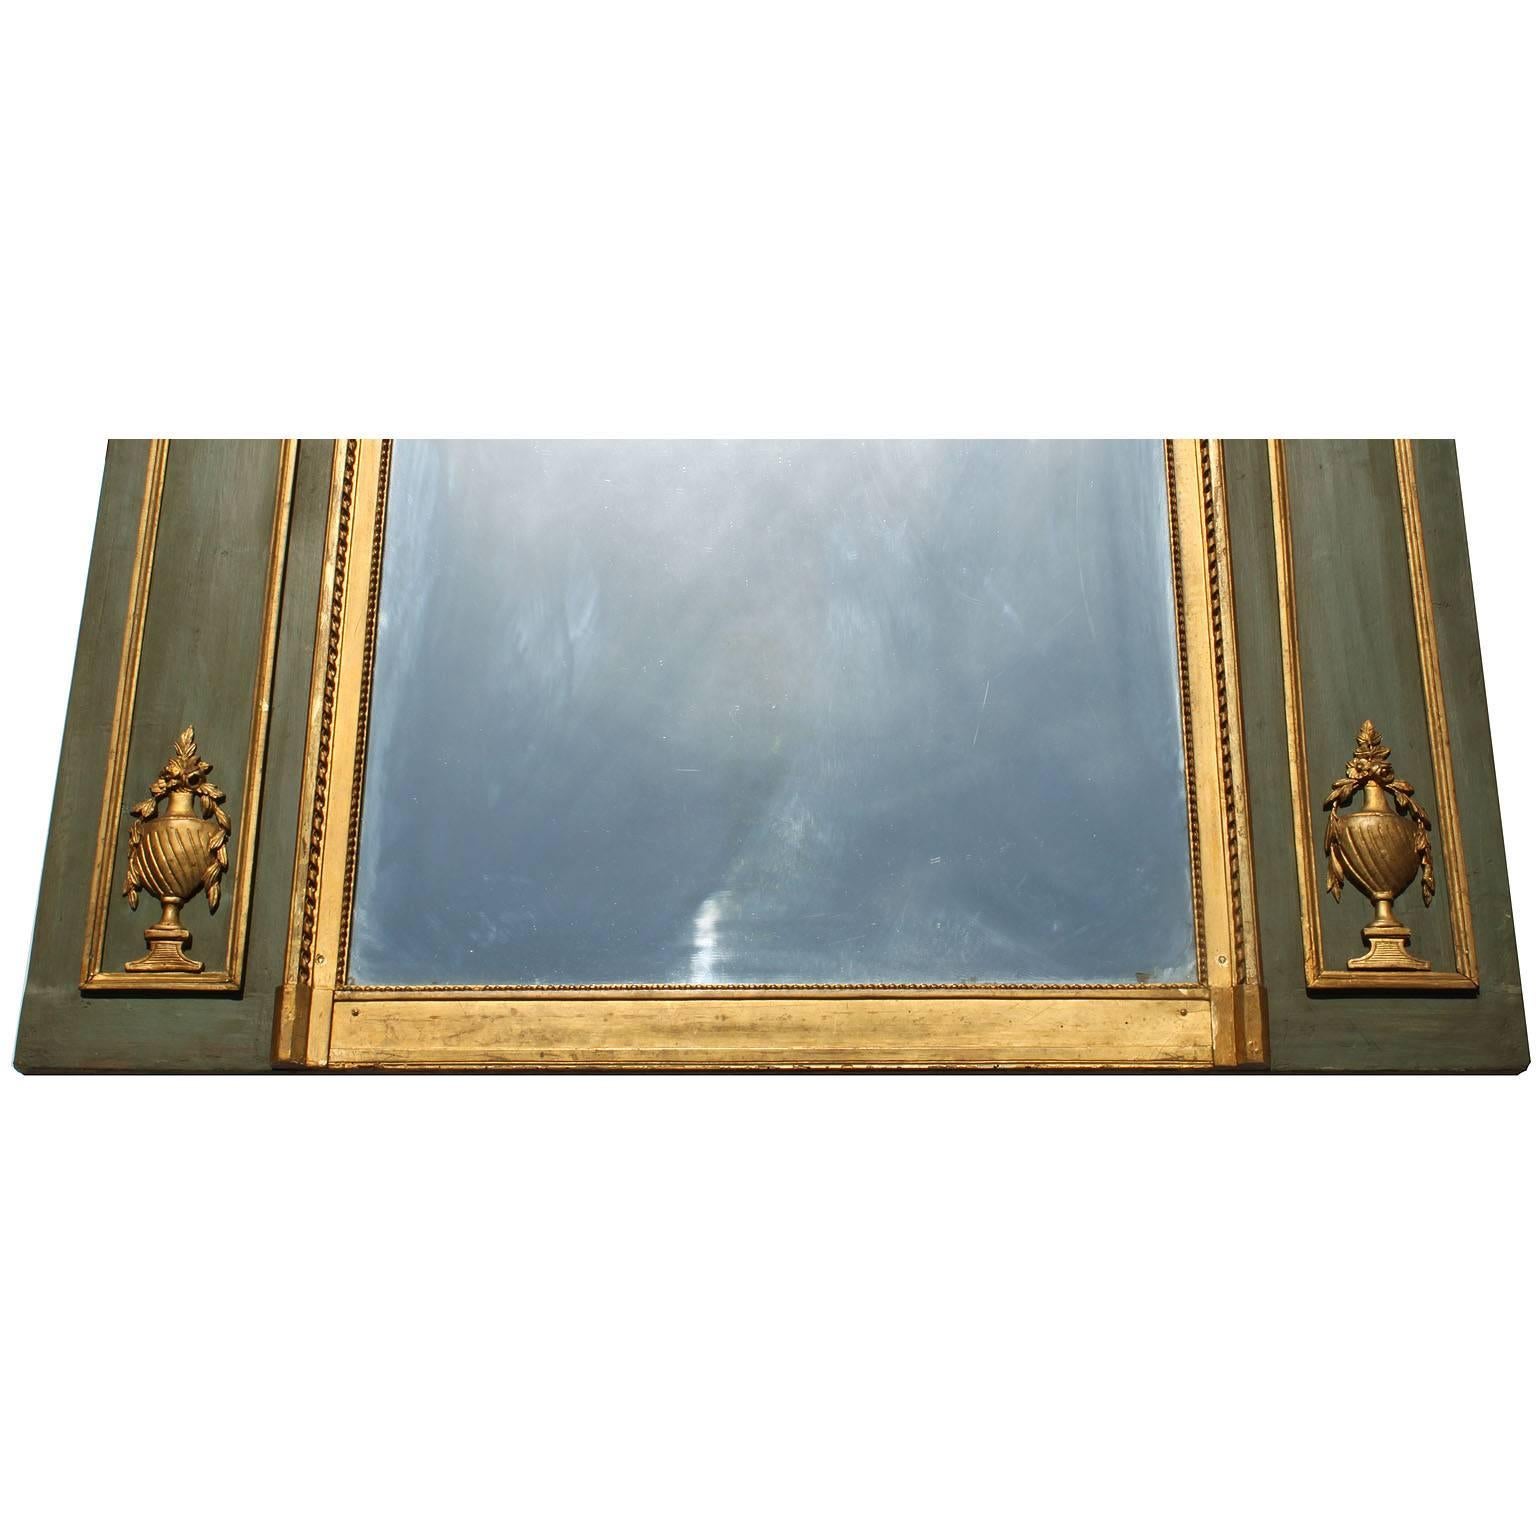 French 19th Century Louis XVI Style Green & Giltwood Carved Trumeu Mirror Frame For Sale 5